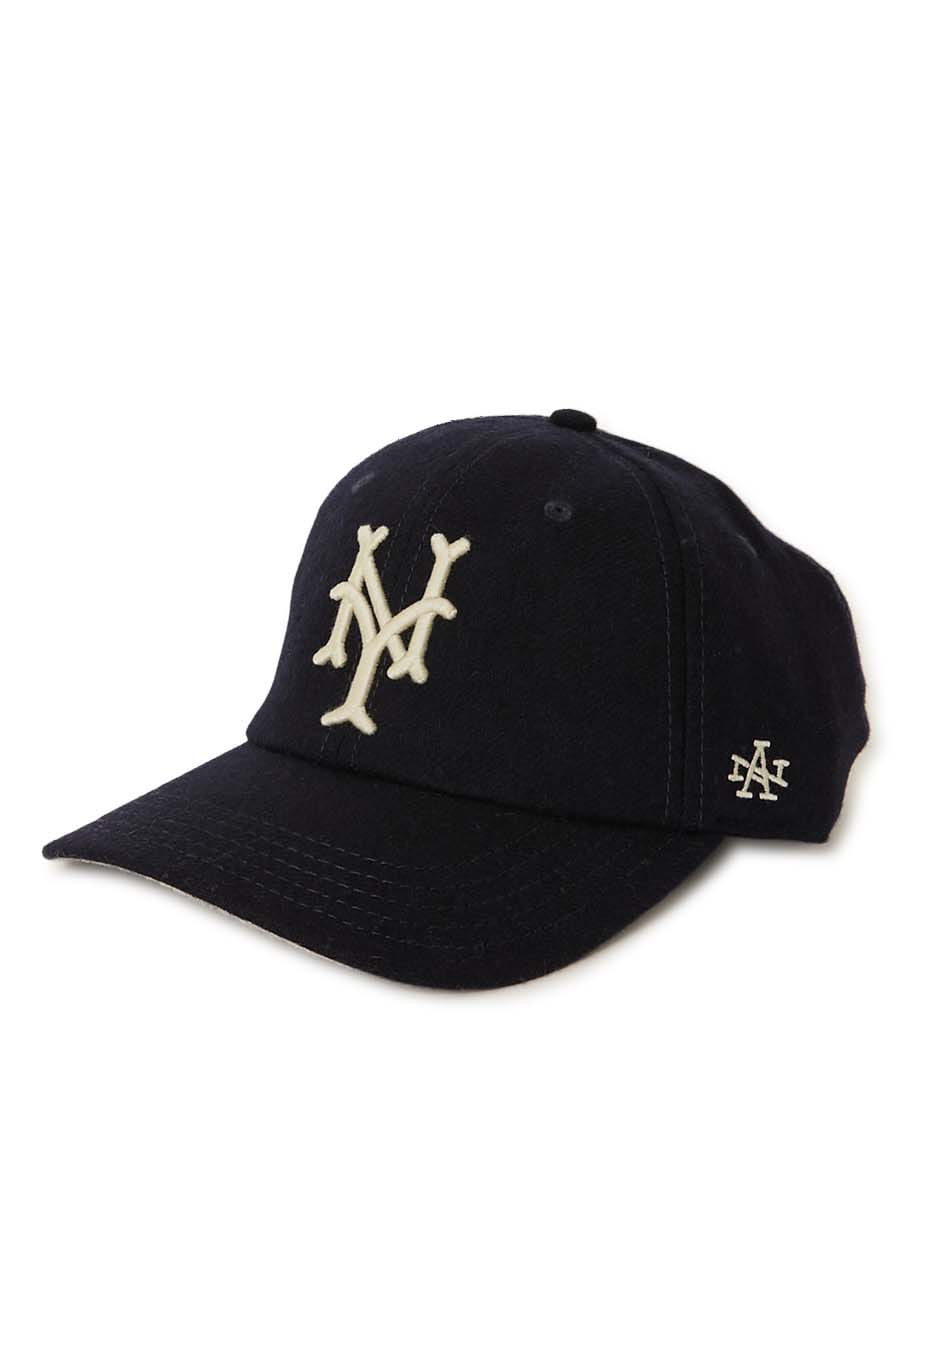 AMERICAN NEEDLE Archive Legend Cap SMU670A-NYC